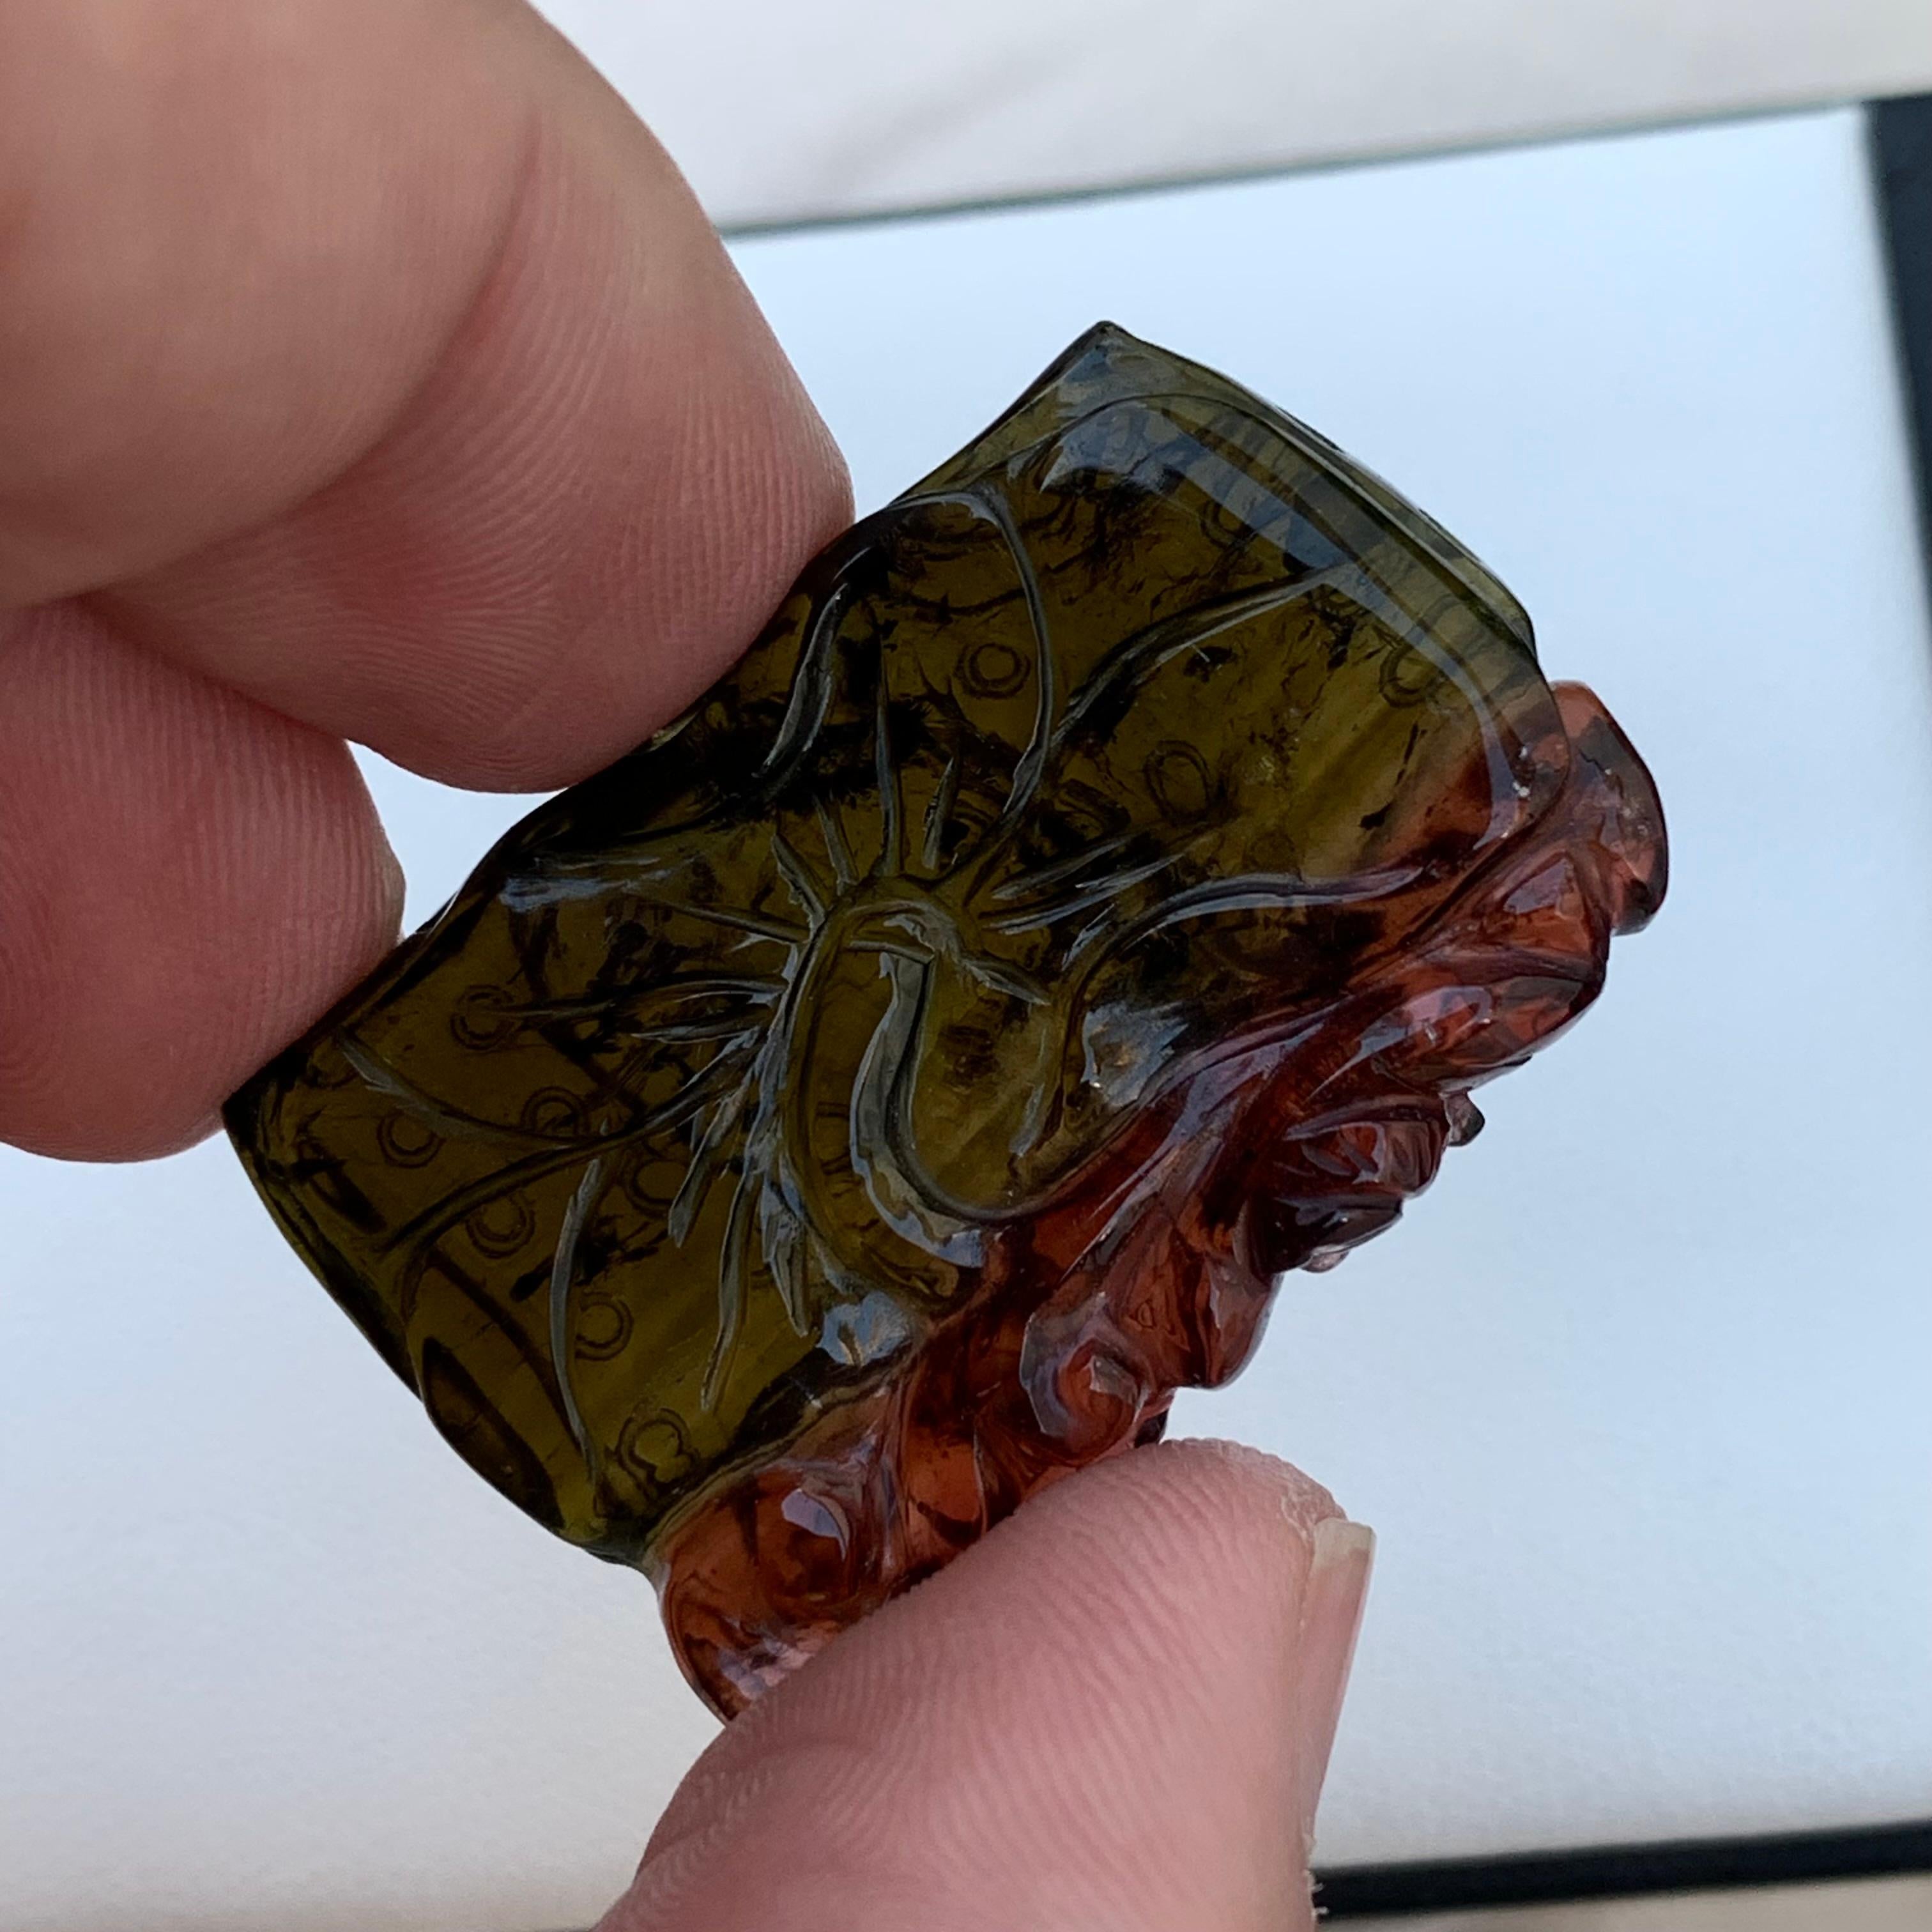 Other 70.85 Carat Bi Colour Tourmaline Drilled Carving From Madagascar  For Sale